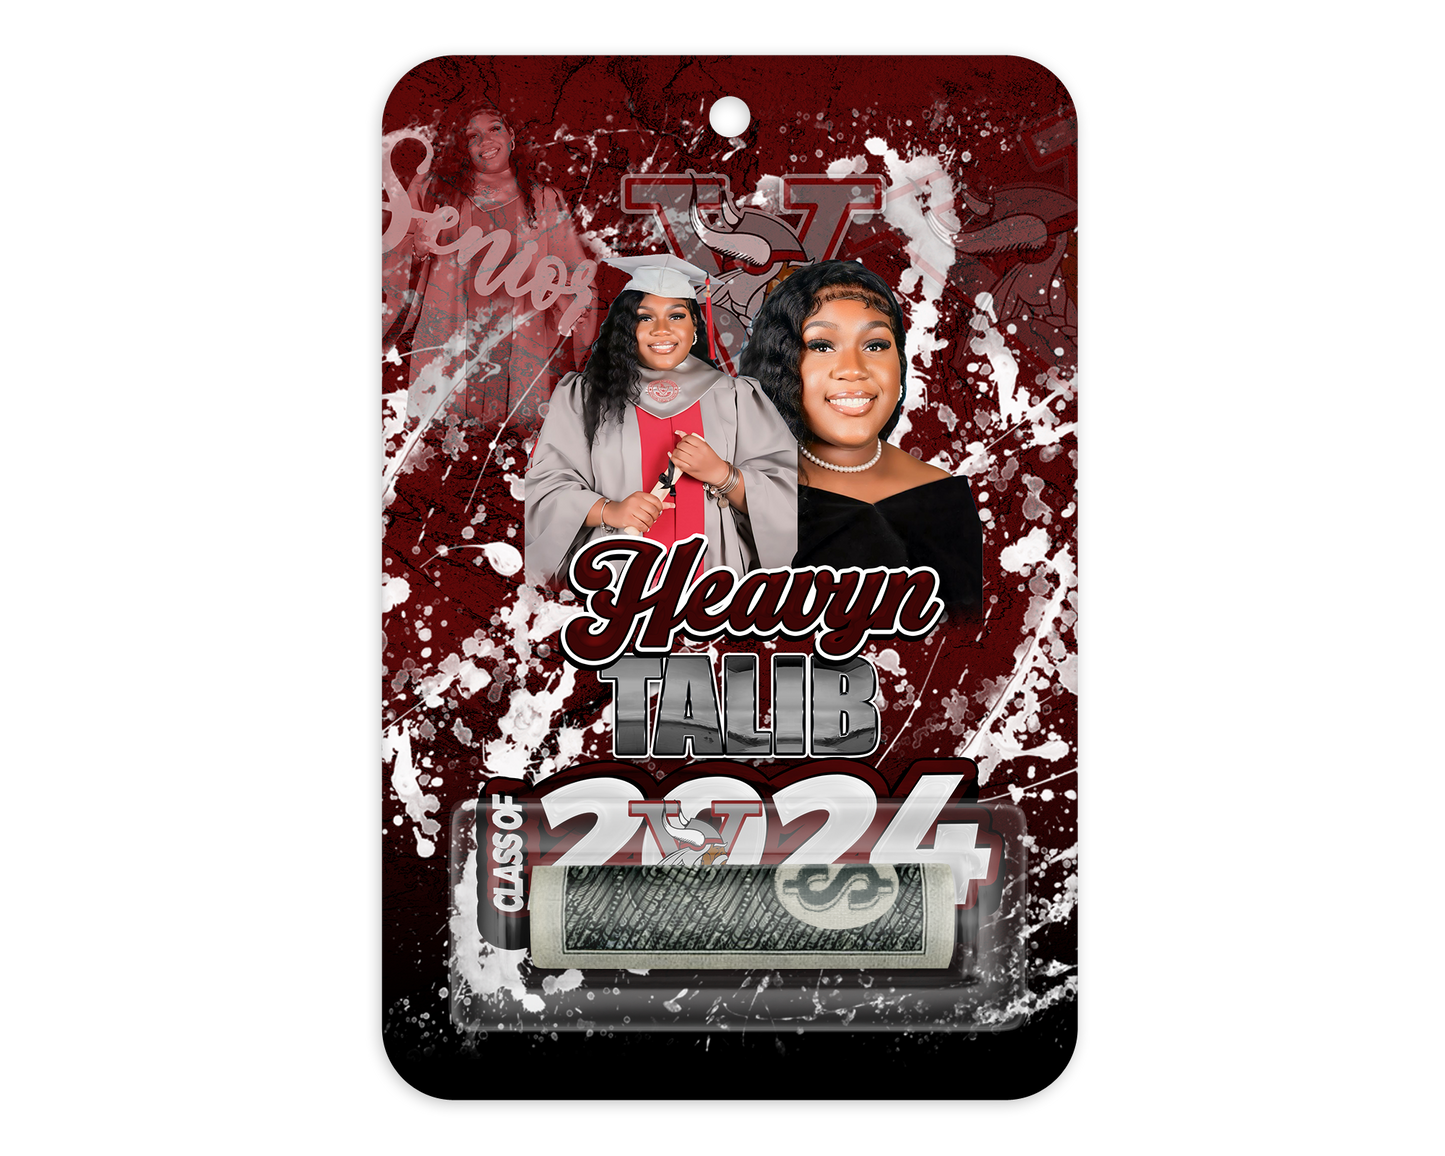 Heavyn - Money Holder -Elevate your gifting game